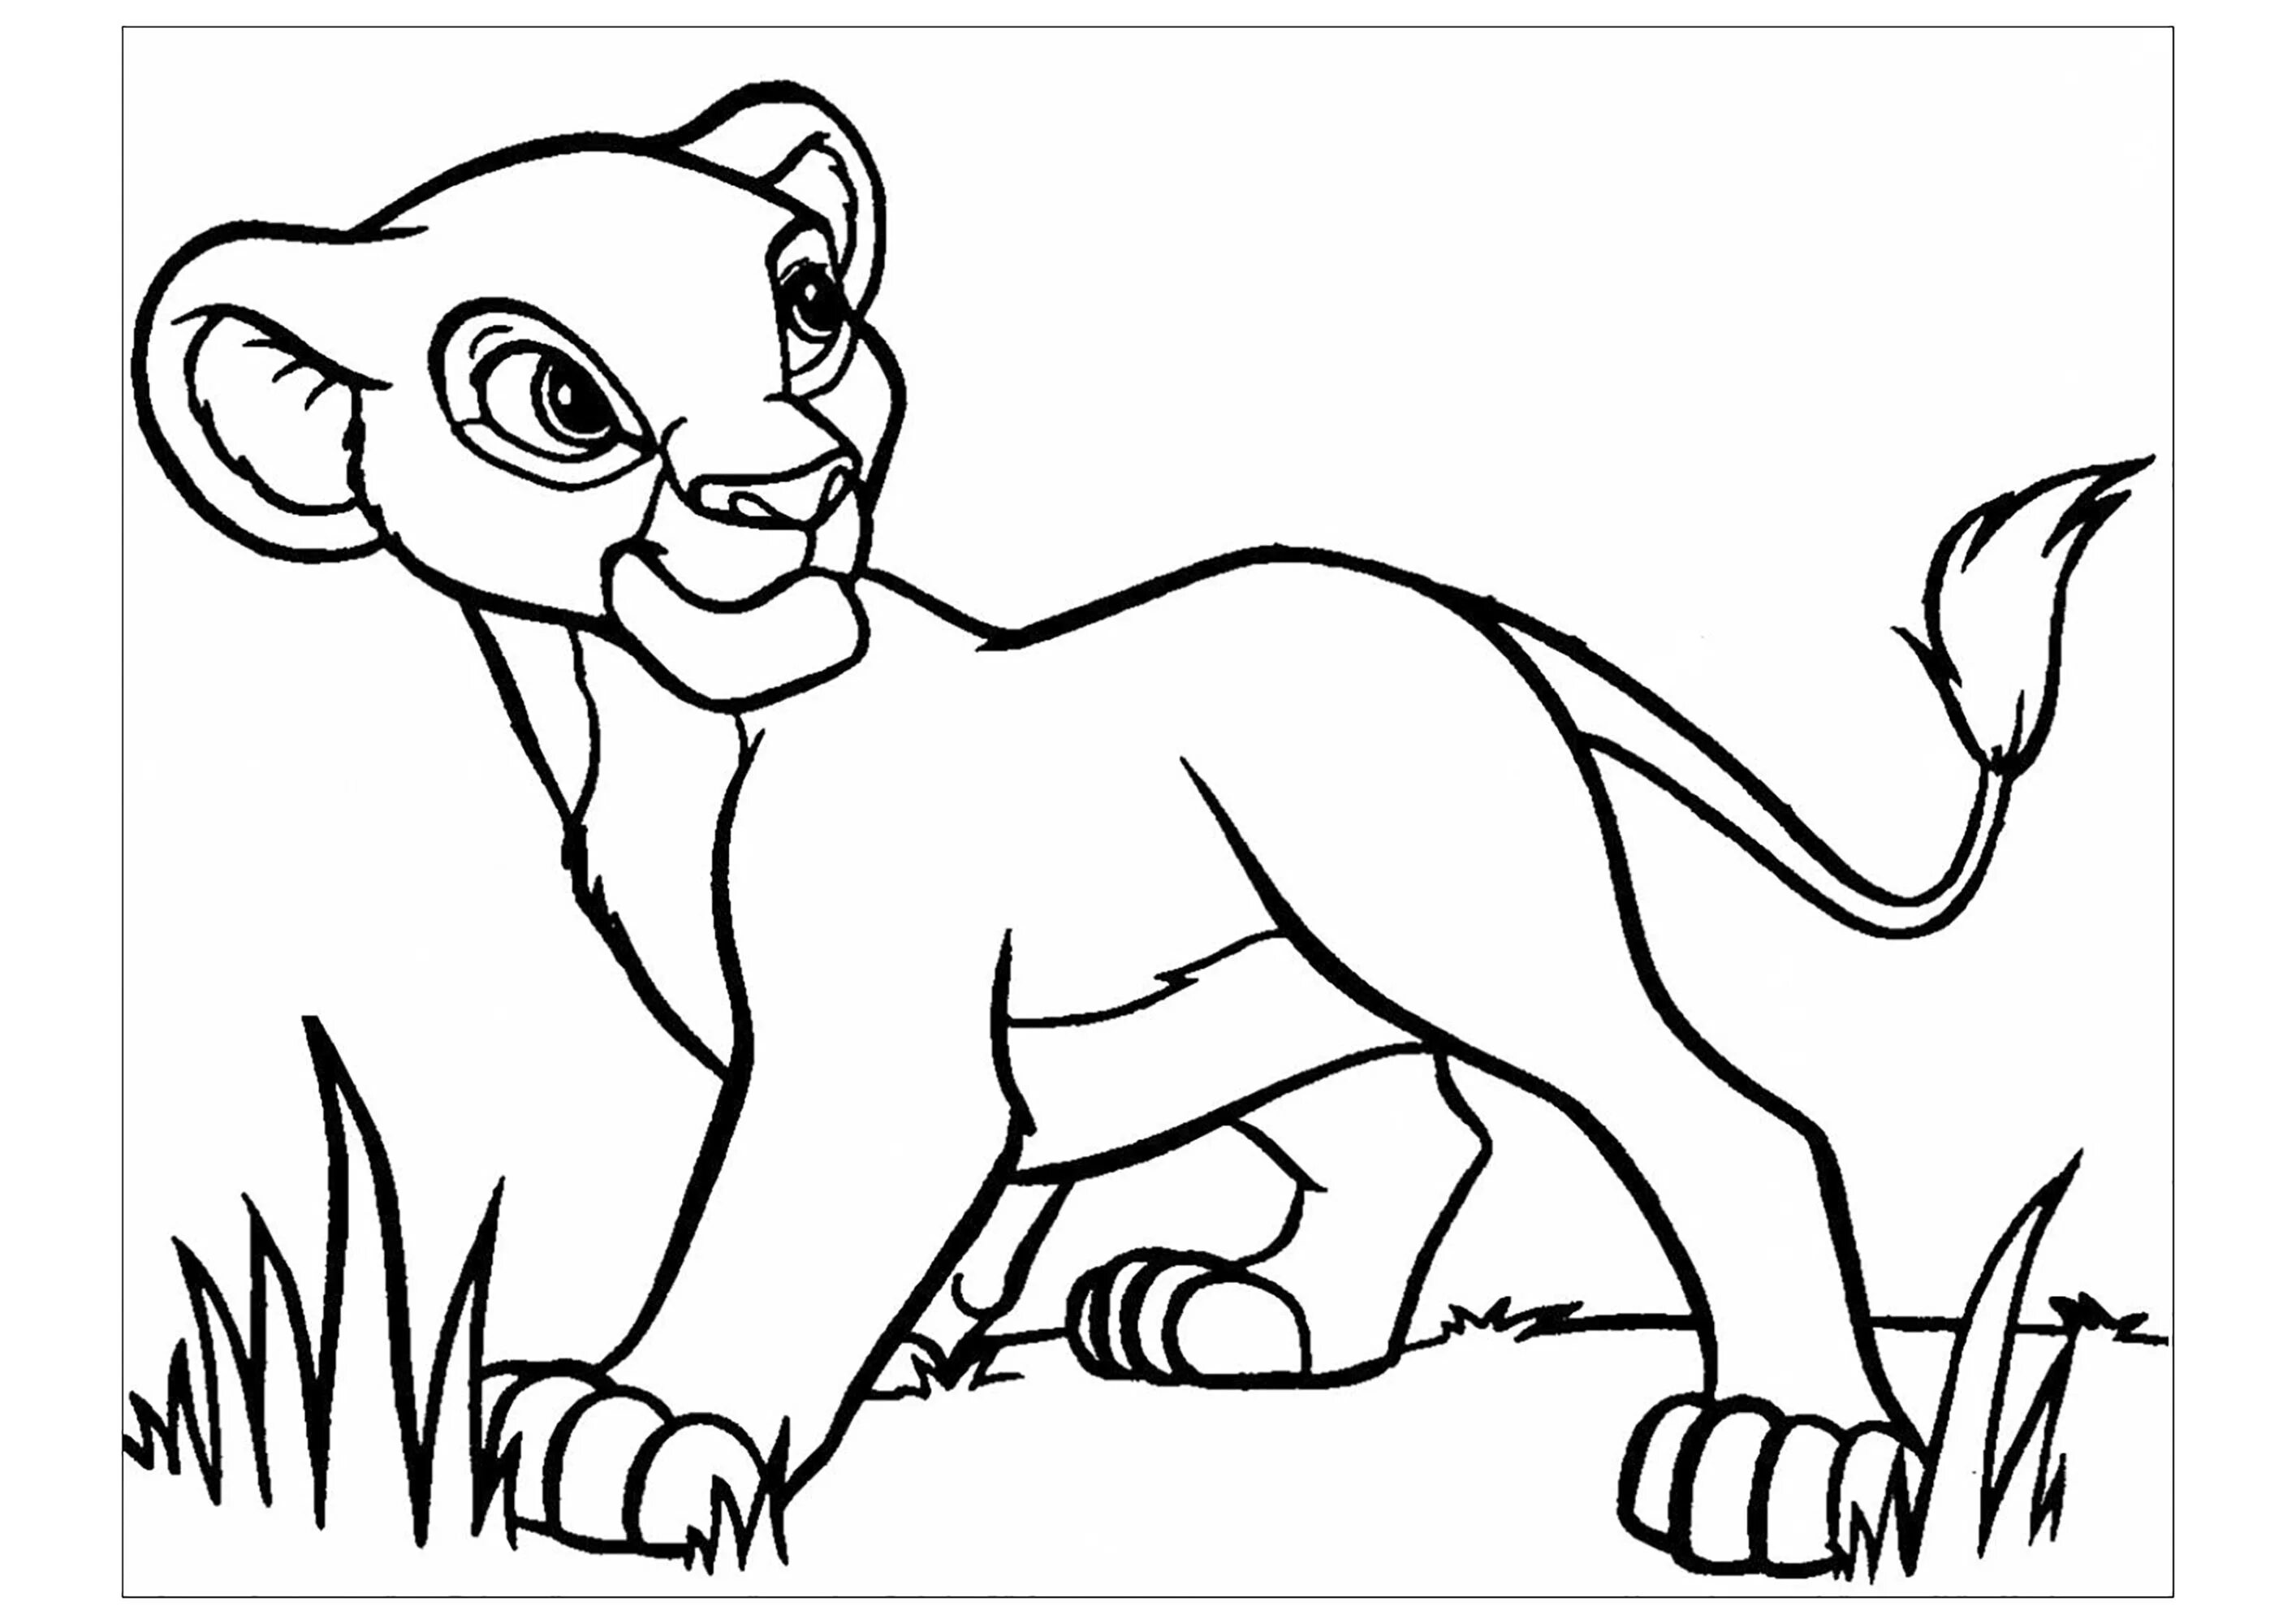 Lion King fun coloring book for kids